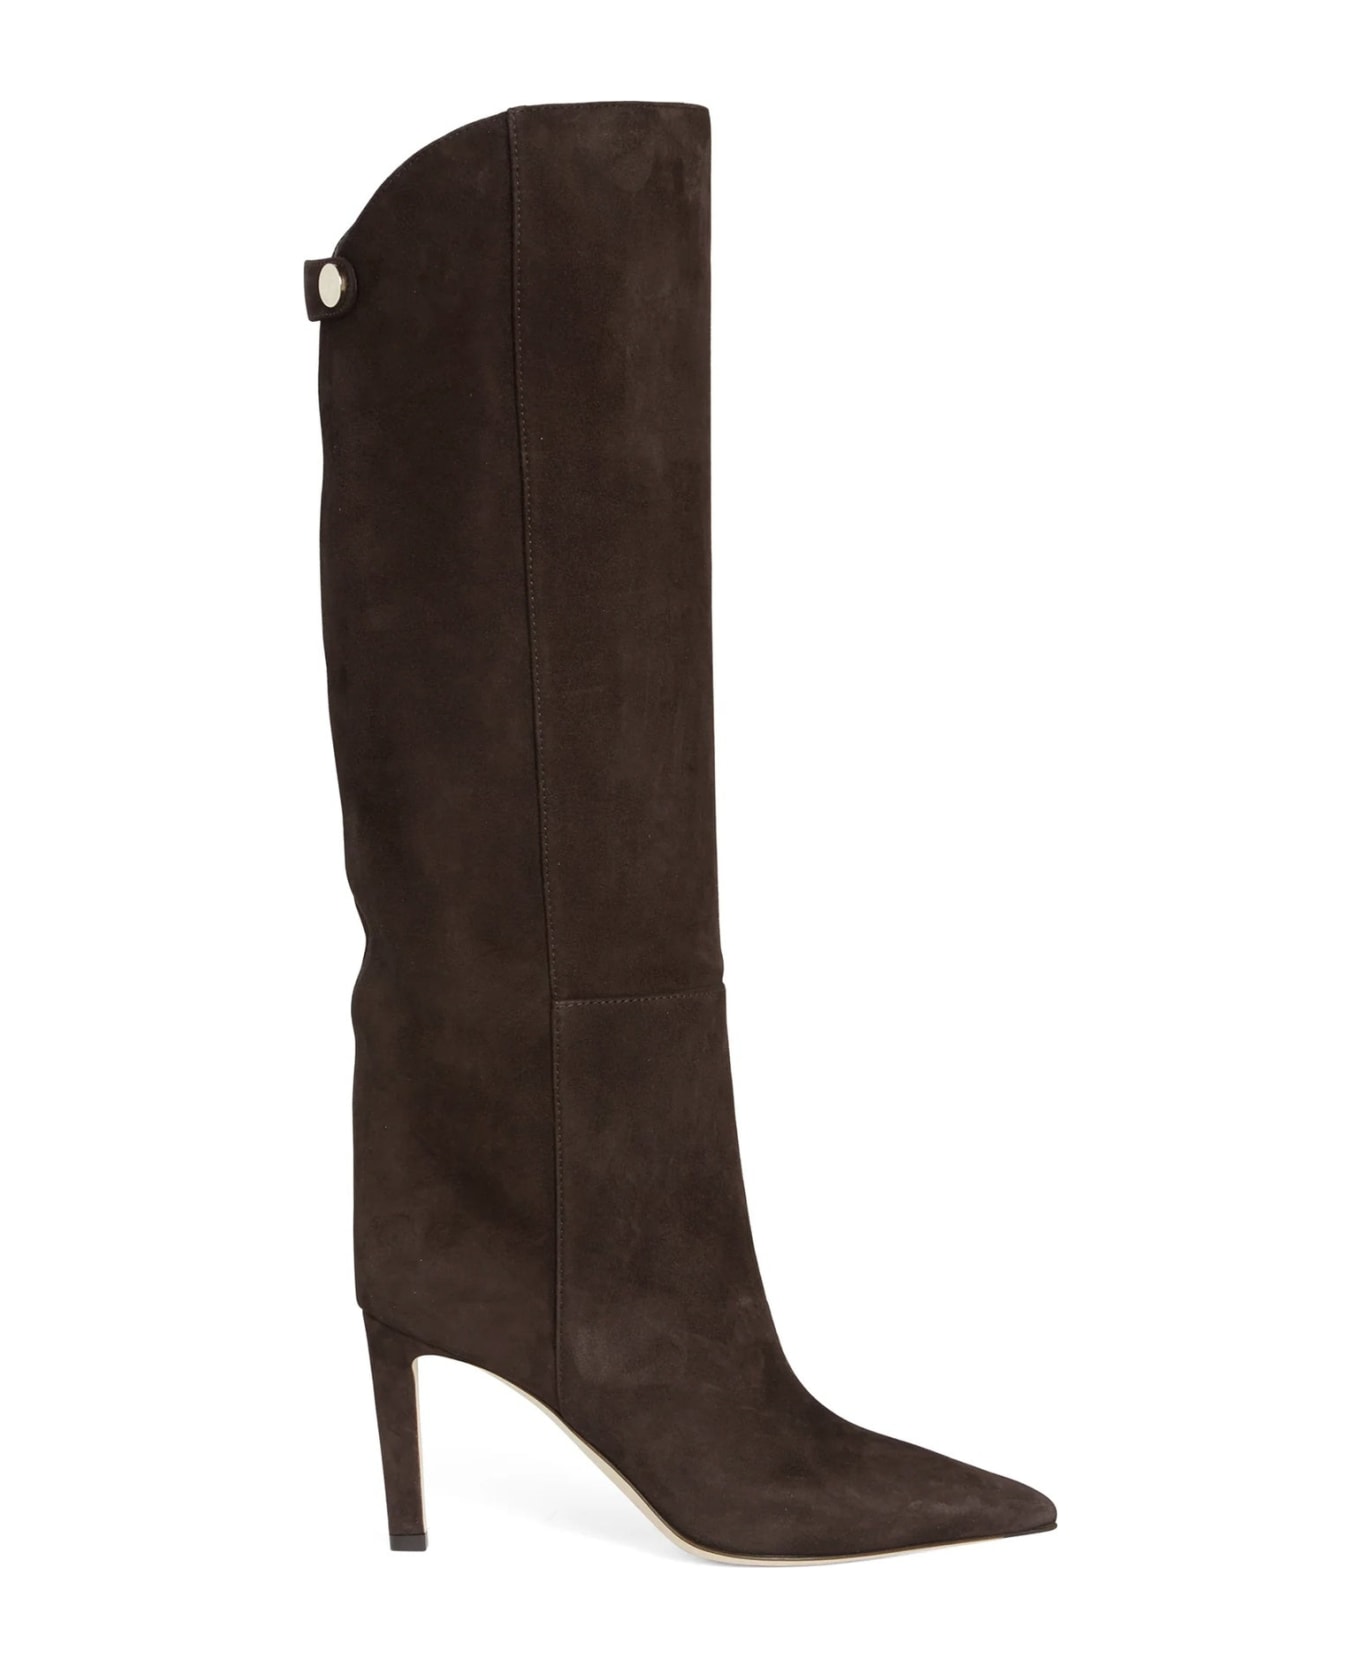 Jimmy Choo Alizze 85 Suede Boots - Brown ブーツ